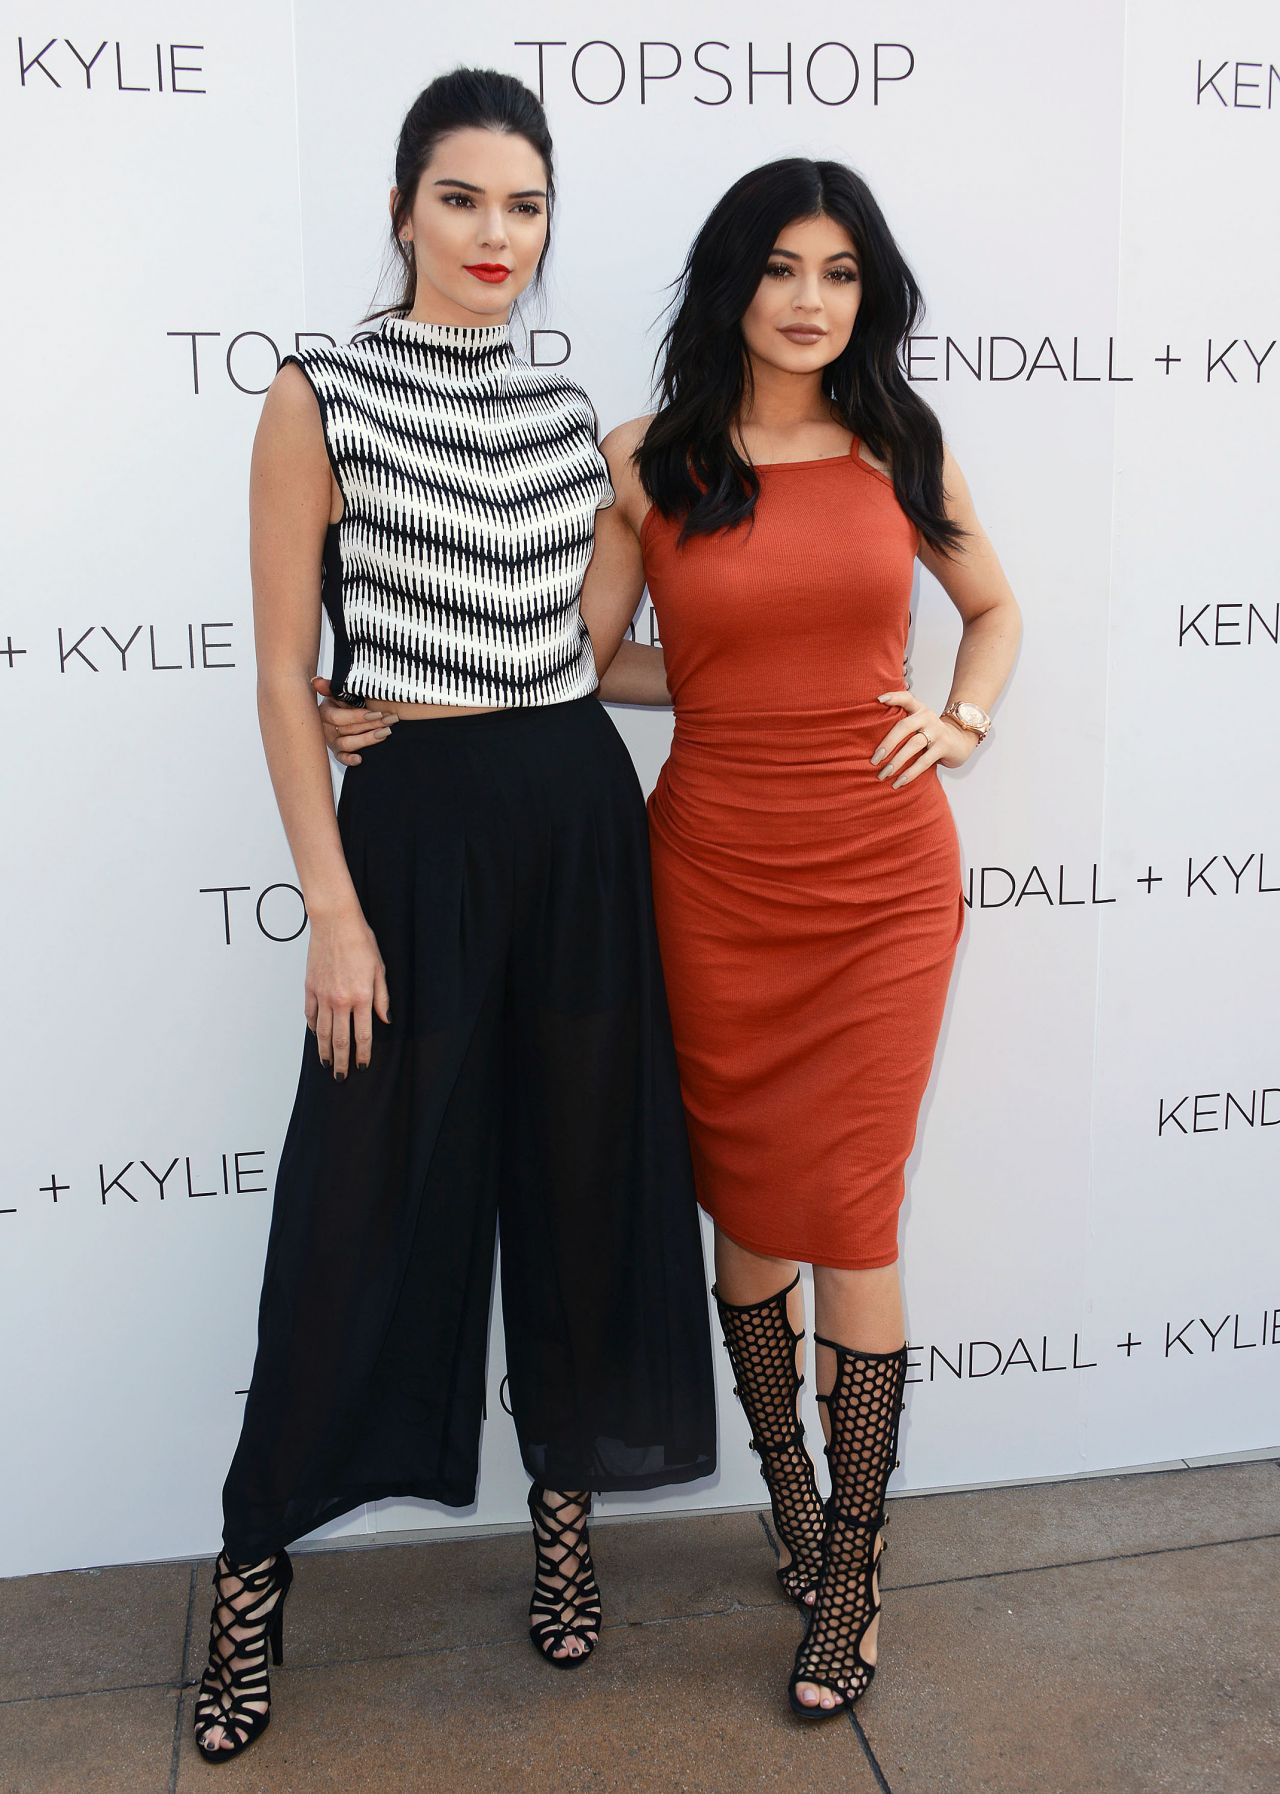 Kendall And Kylie Jenner Launch Party For The Kendall Kylie Fashion Line At Topshop In La